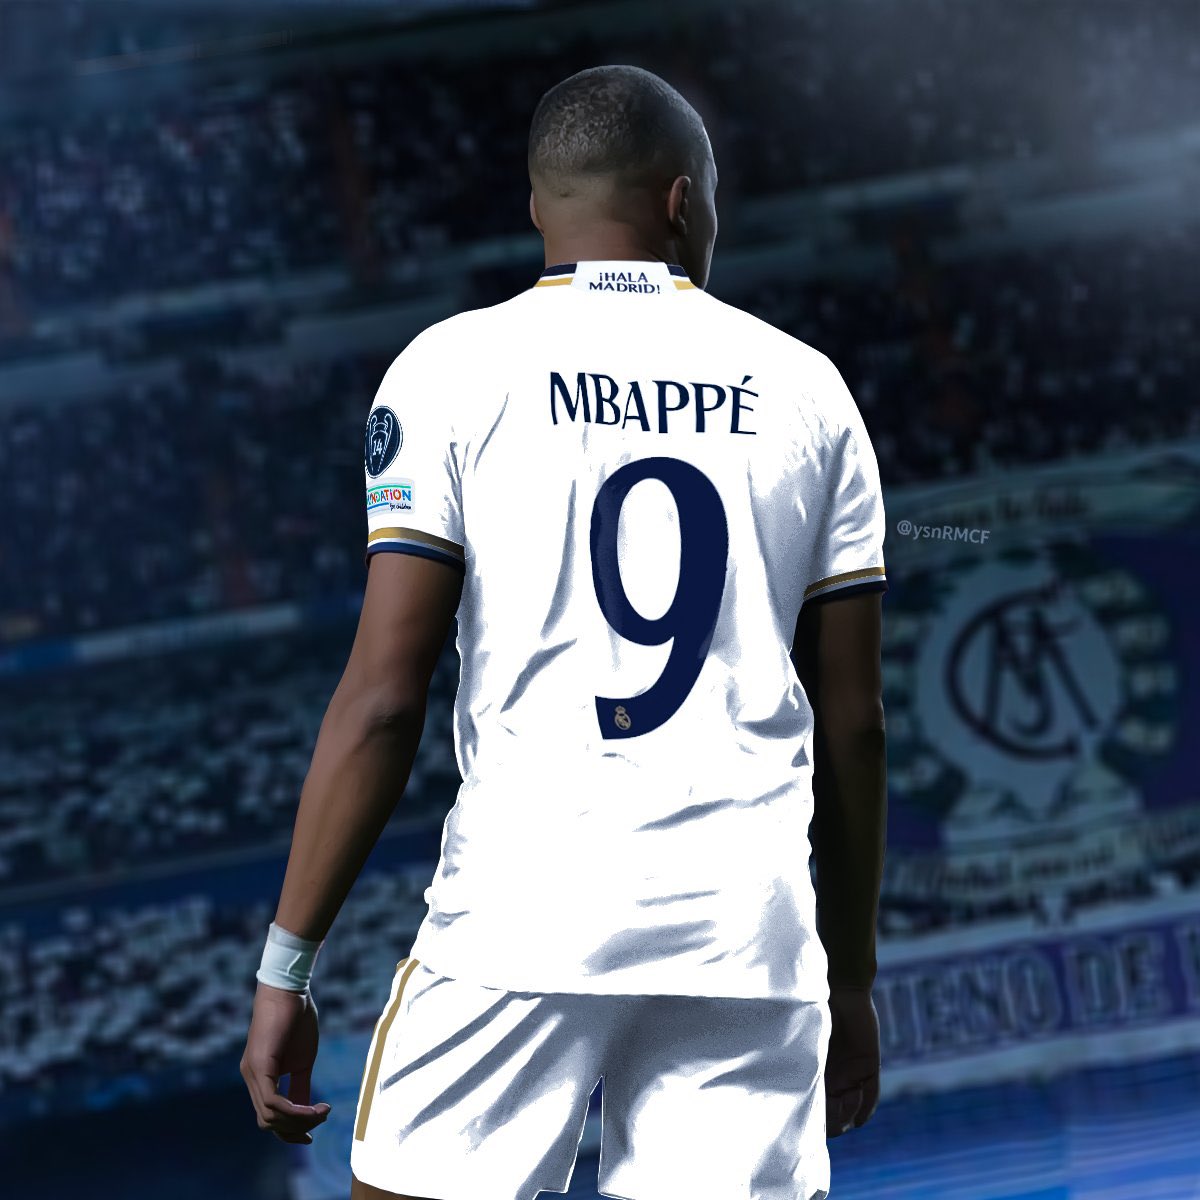 If Real Madrid sign Kylian Mbappé this summer, I will give everybody who like this tweet €50 

Must enter before 'Here We Go!'

(Only through Paypal)